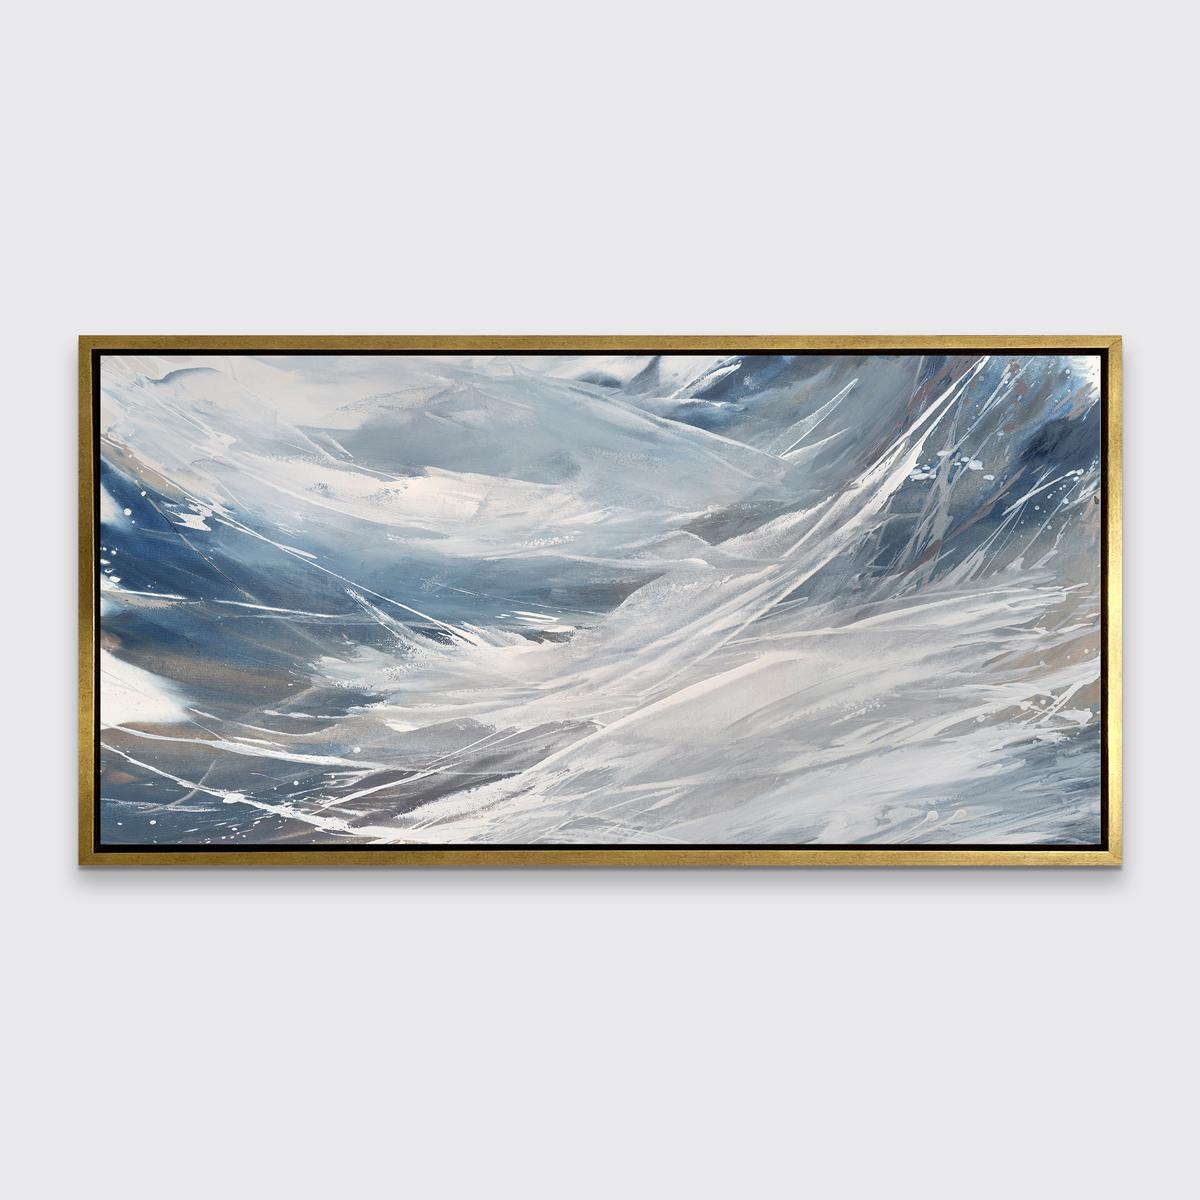 This contemporary abstract limited edition print by Teodora Guererra features a cool, neutral grey palette of blue, grey, and white, with subtle warm accents integrated in layers.

This Limited Edition giclee print by Teodora Guererra is an edition